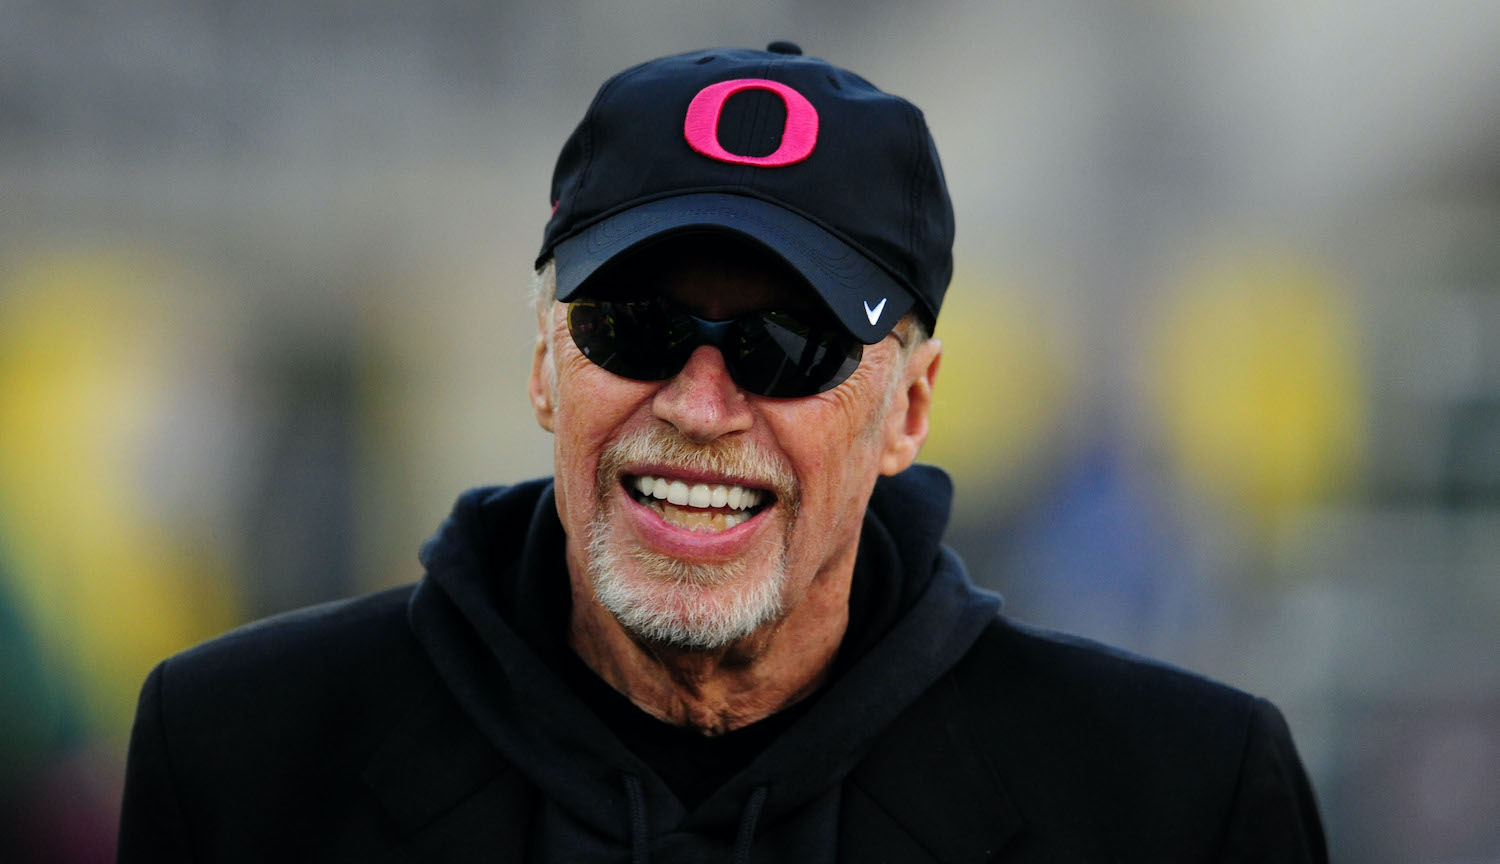 Phil Knight sold running shoes out of the trunk of his car before founding Nike and building an enormous net worth.